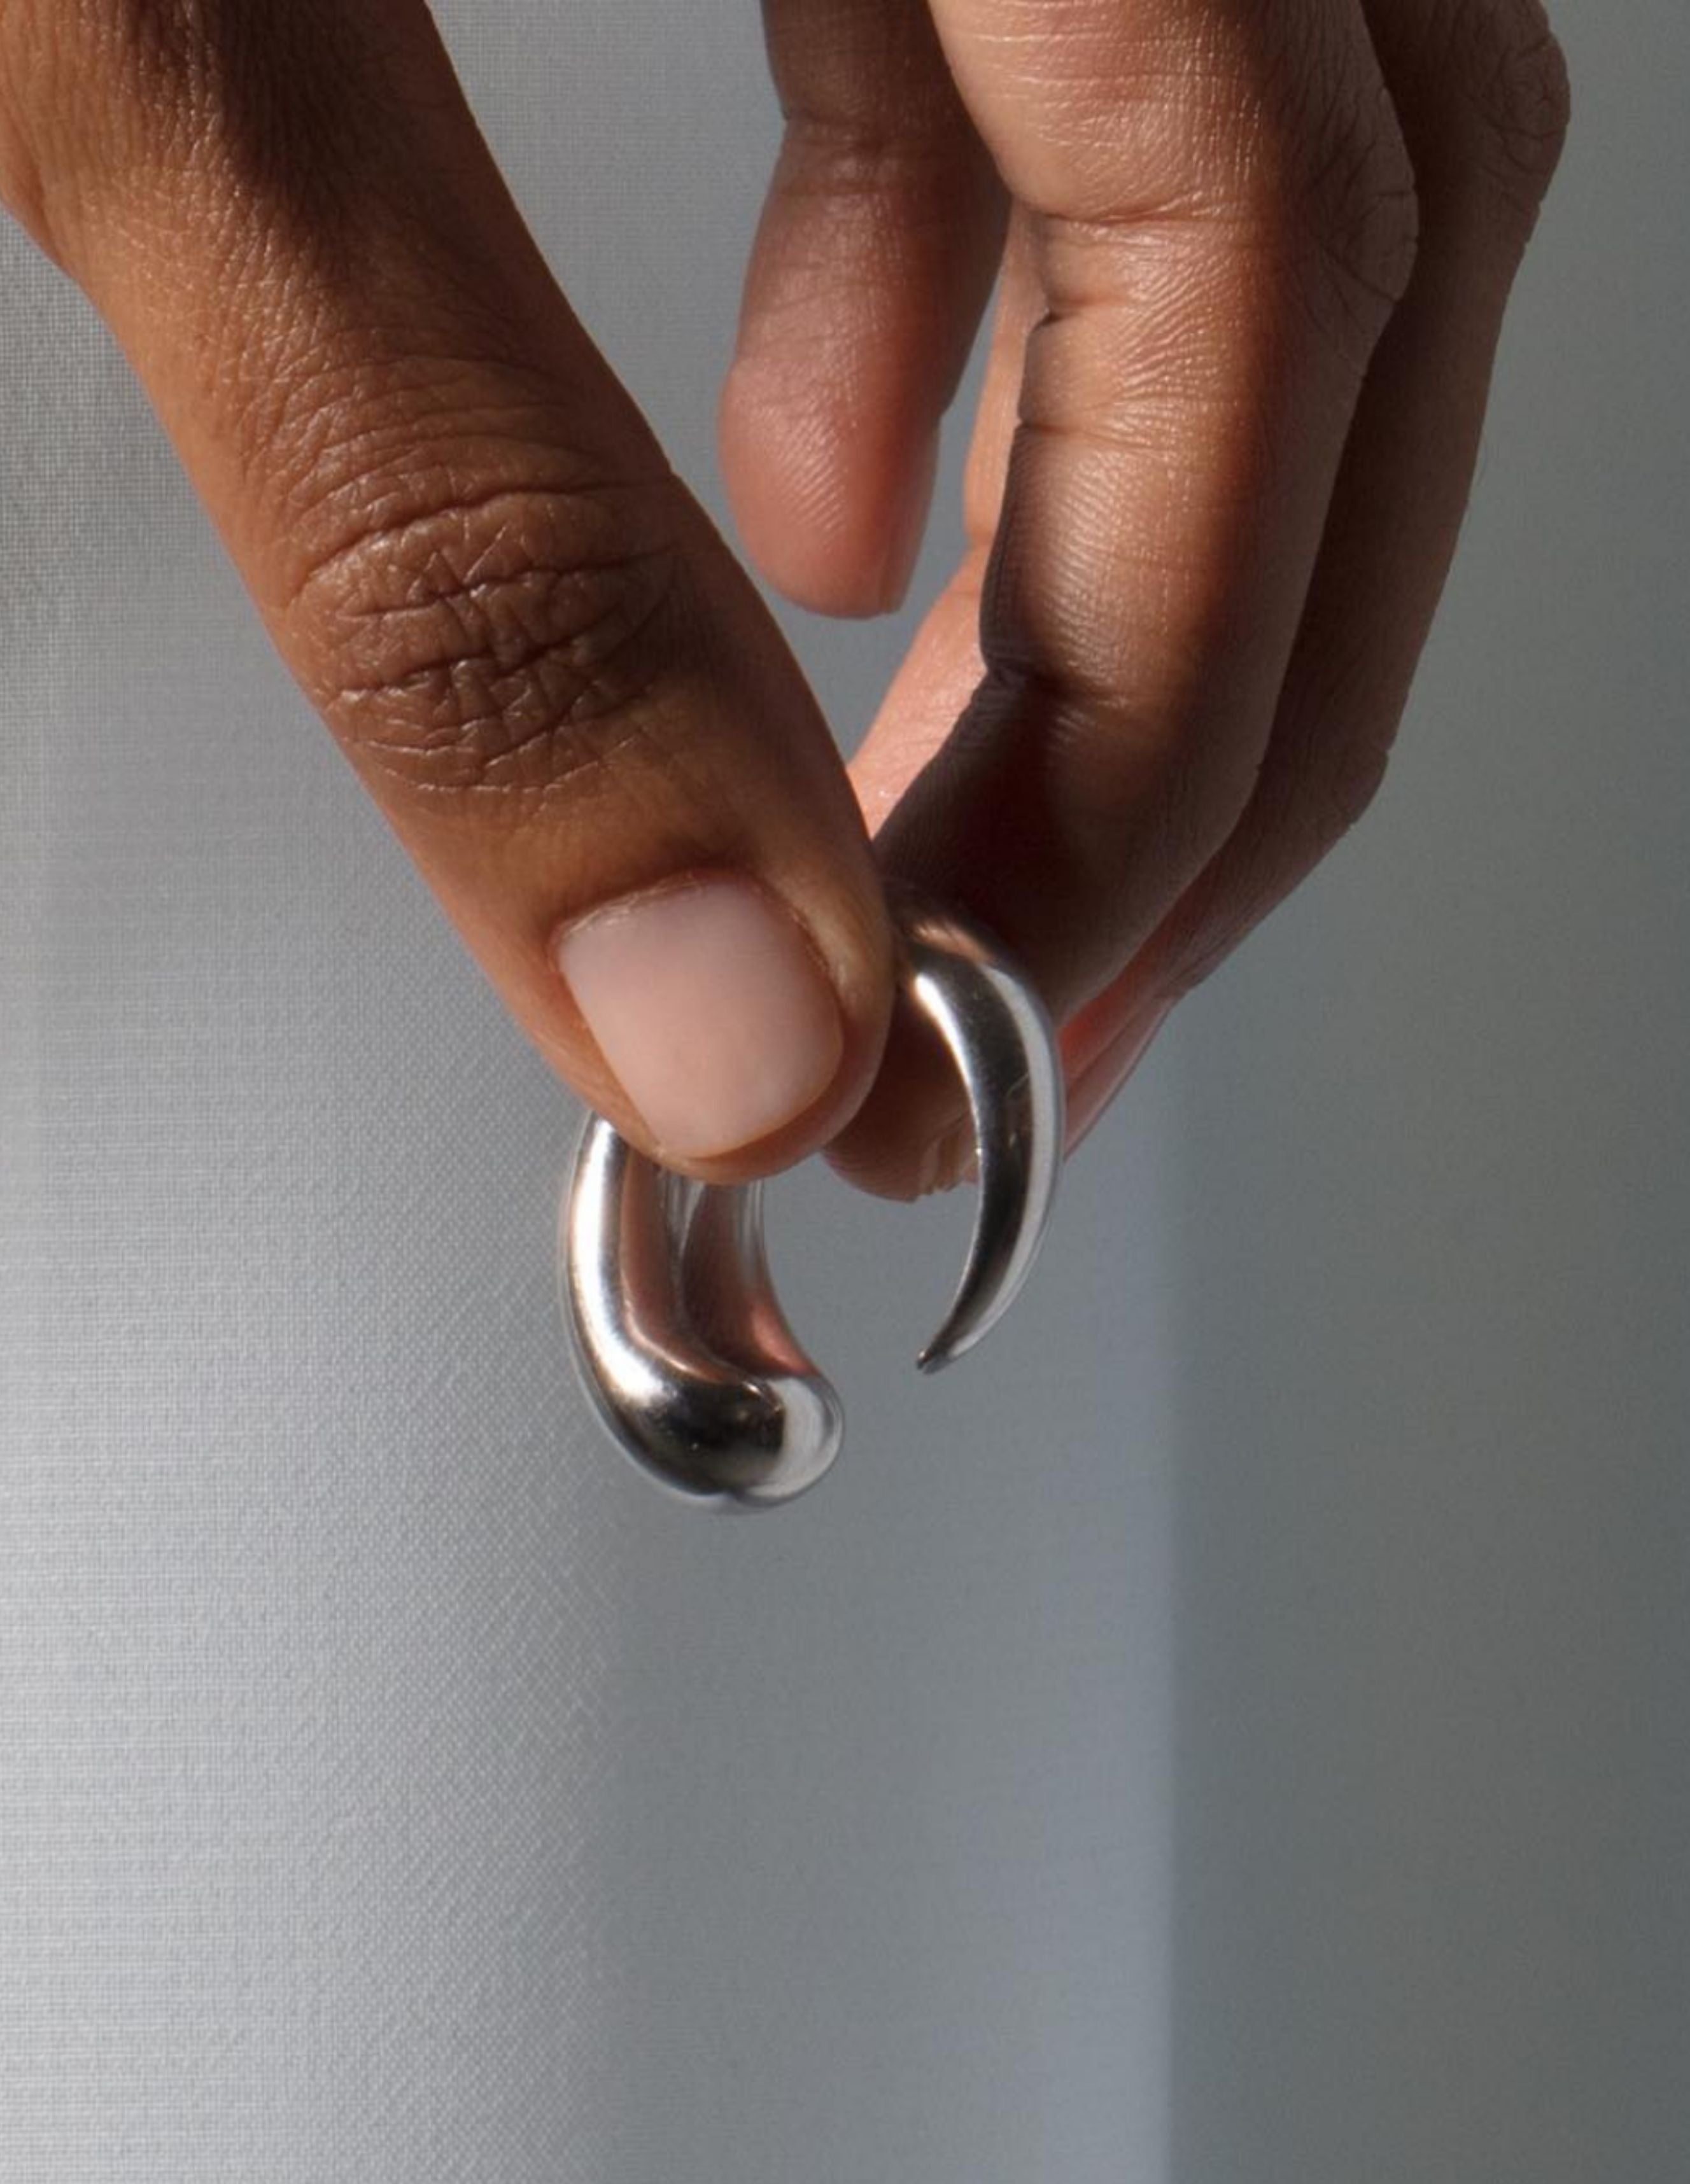 Khartoum I Ring Nude in Sterling Silver